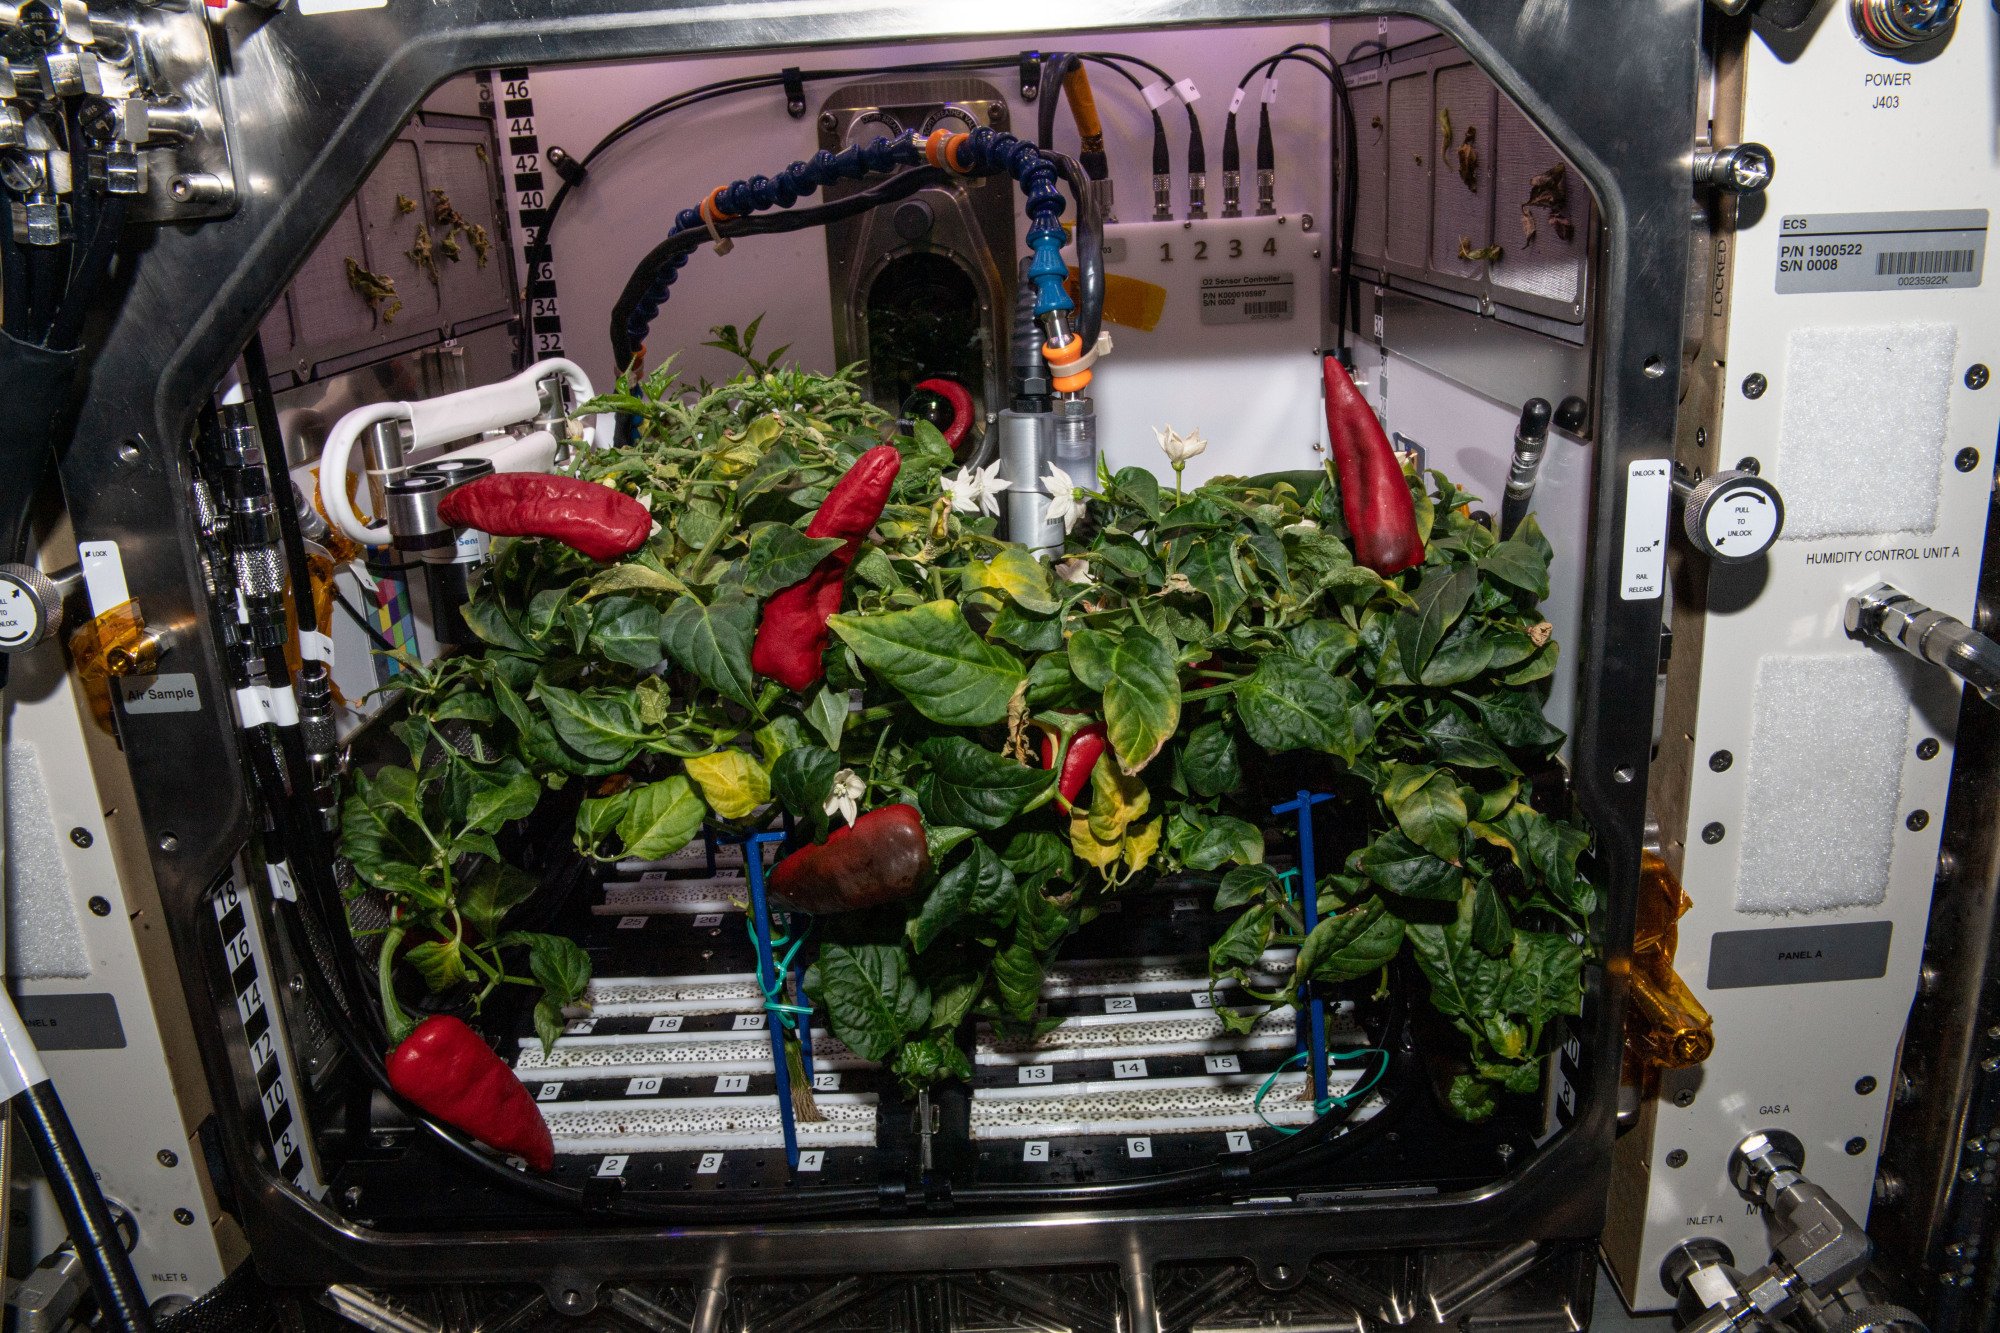 Chili peppers growing on the International Space Station